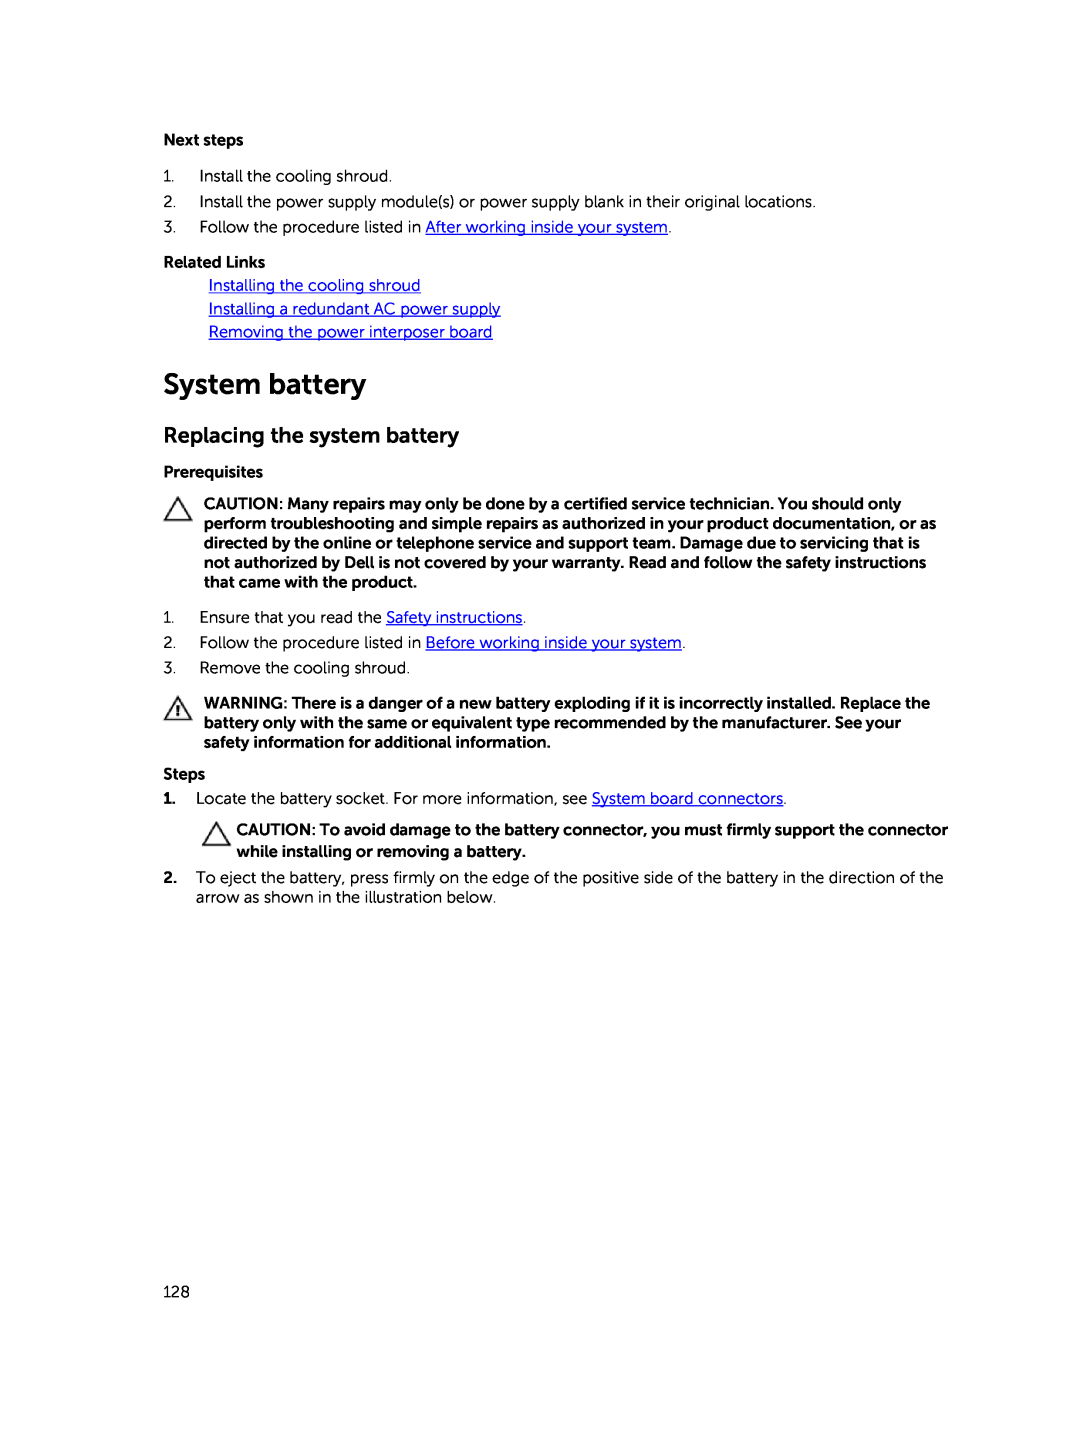 Dell E30S owner manual System battery, Replacing the system battery, Removing the power interposer board 